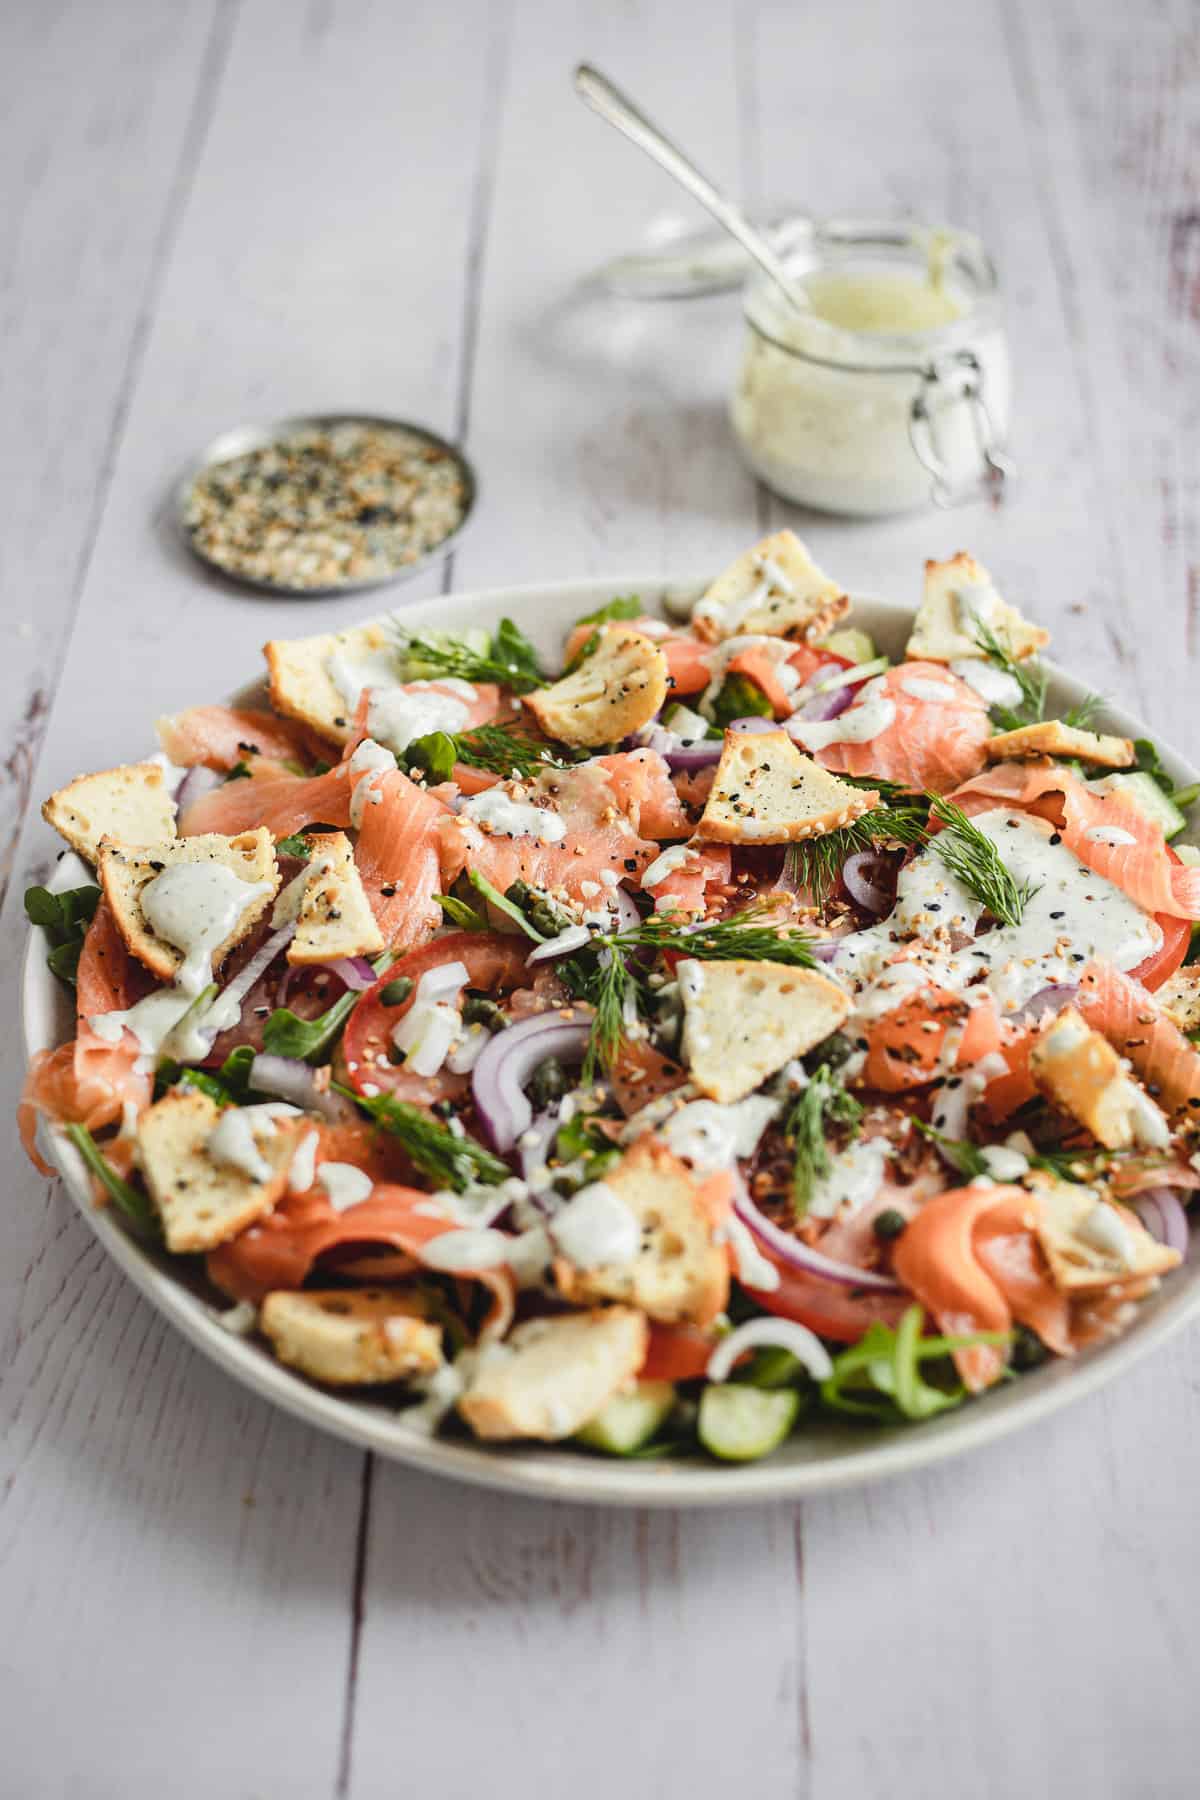 platter of salad with dressing and bagel seasoning